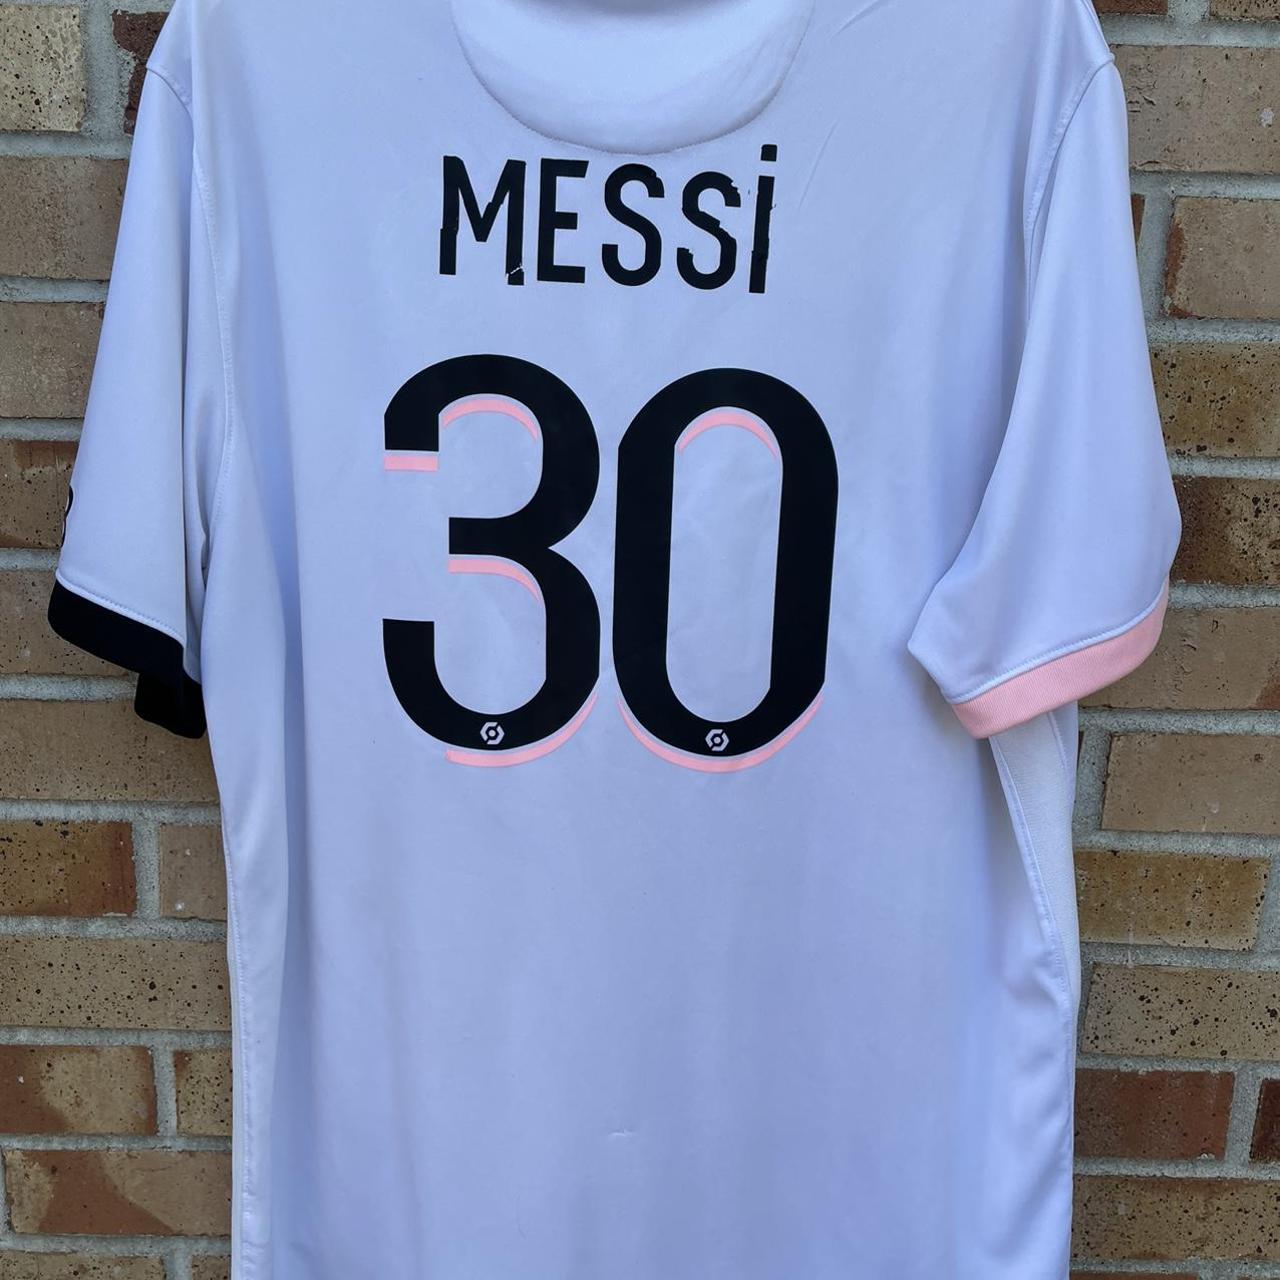 Product Image 3 - Nike PSG Jersey
30 Lionel Messi
Size